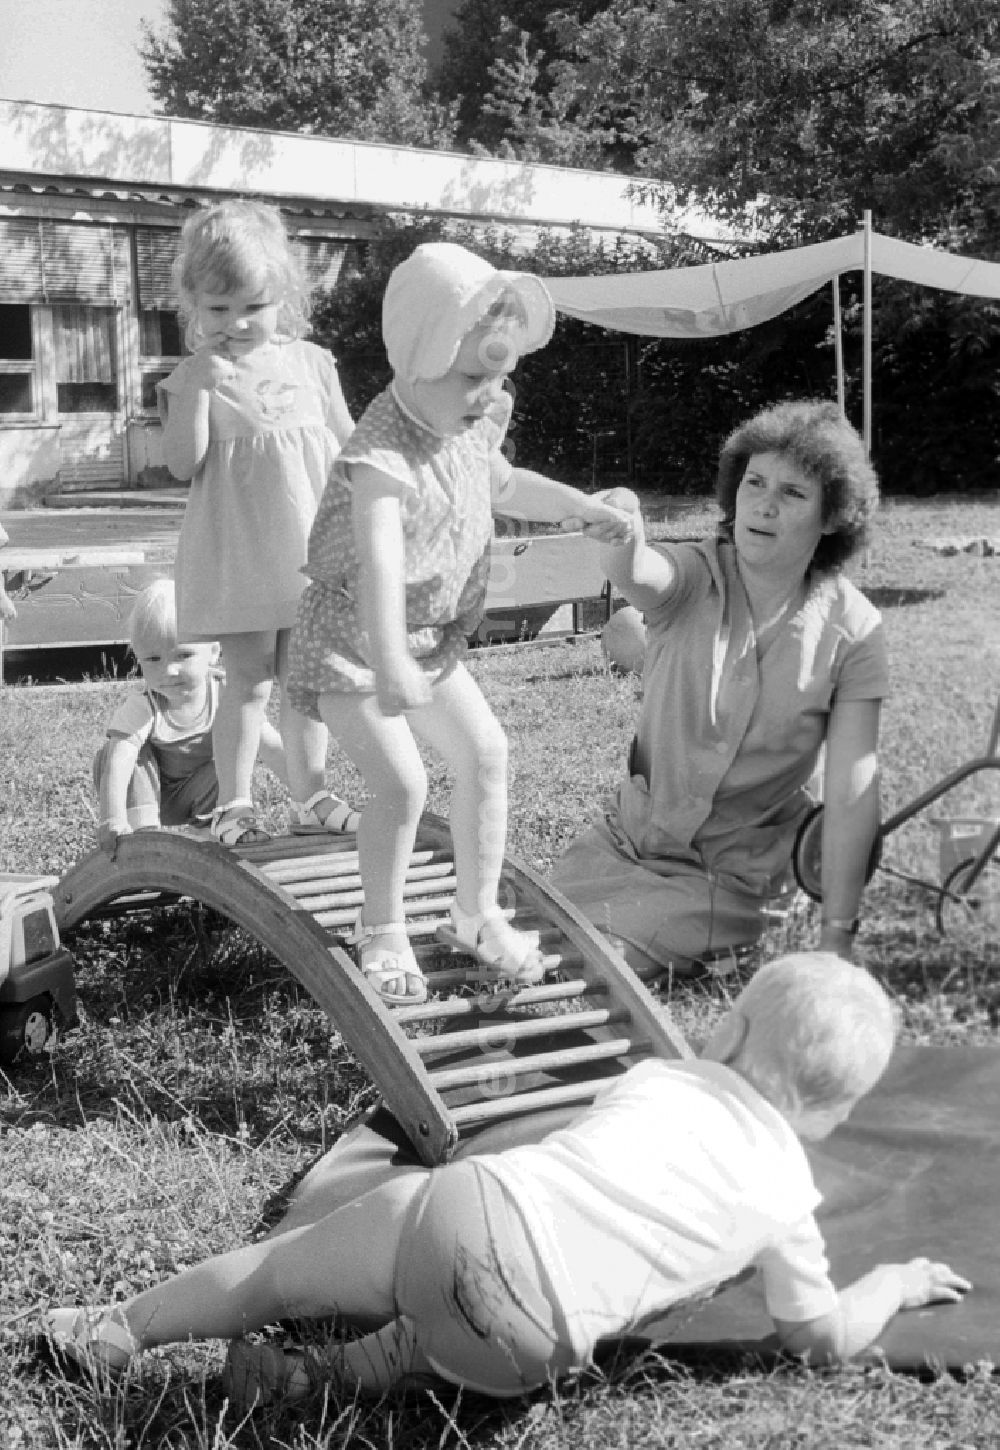 GDR image archive: Berlin - Children play together with her educator in the garden and do gymnastics about a wooden rung curve in Berlin, the former capital of the GDR, German democratic republic